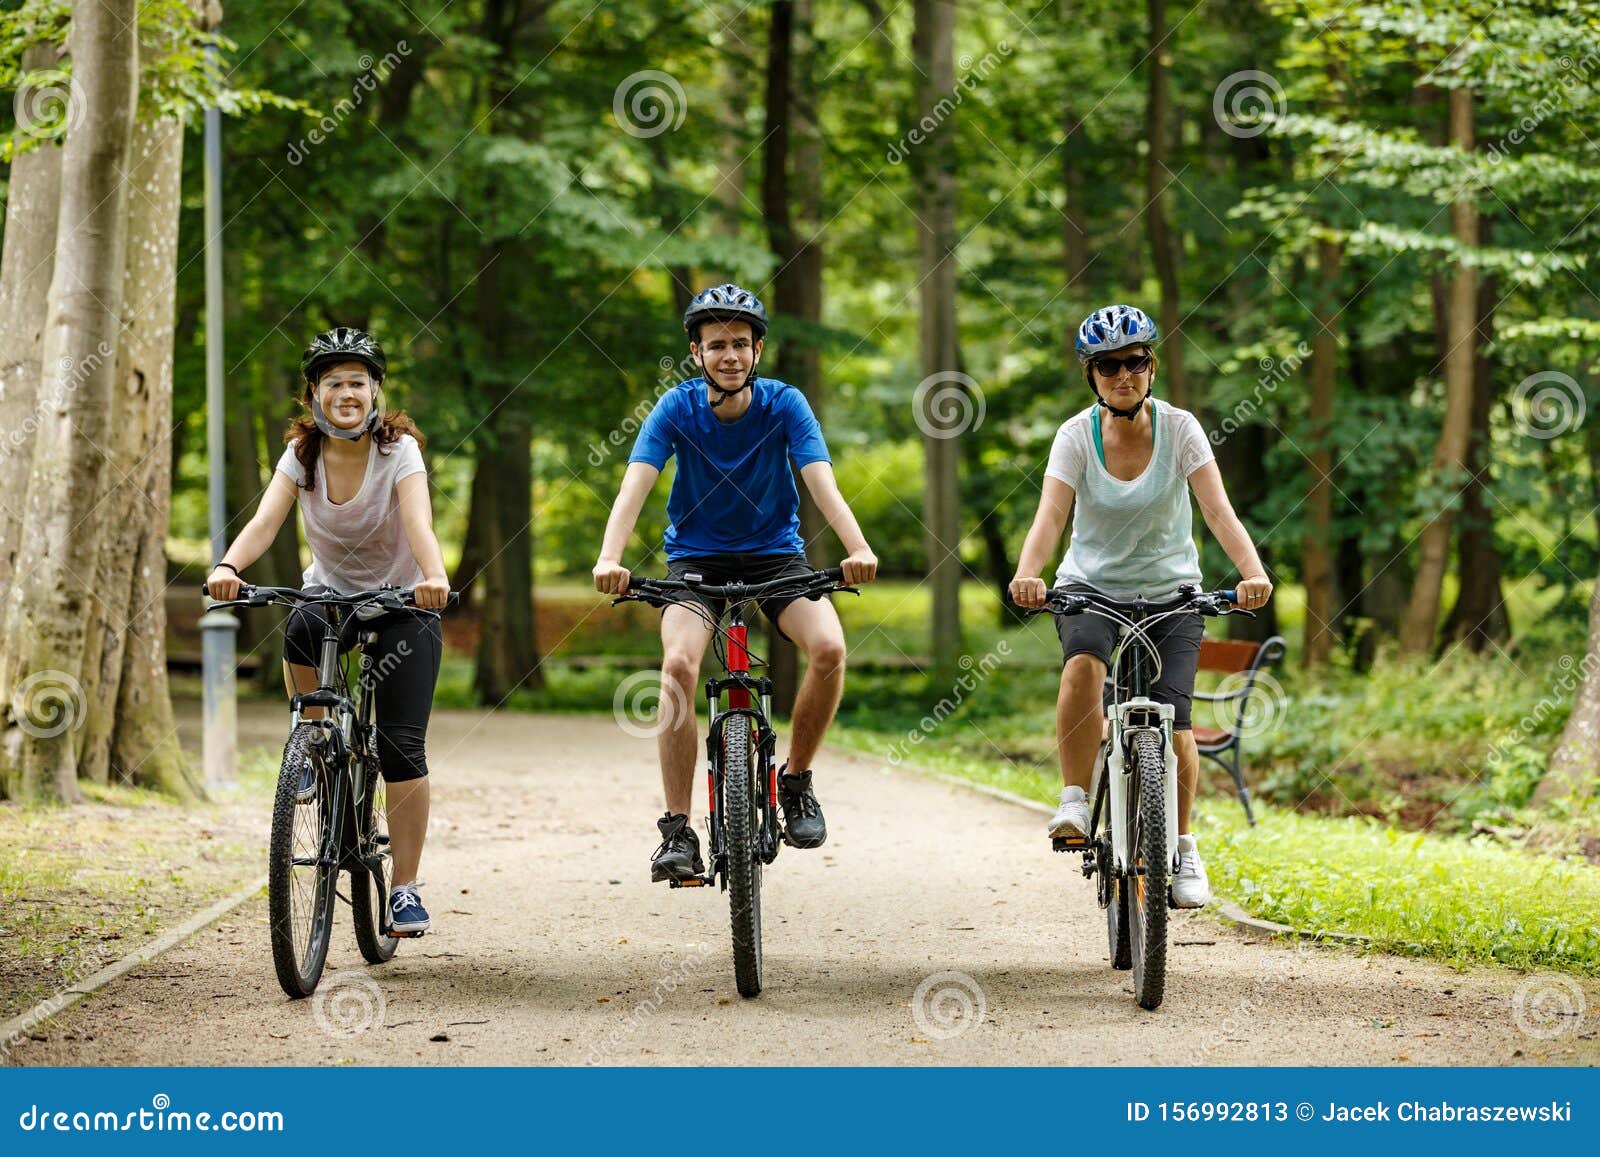 Healthy Lifestyle Happy People Riding Bicycles In City Park Stock Image Image Of Bikers